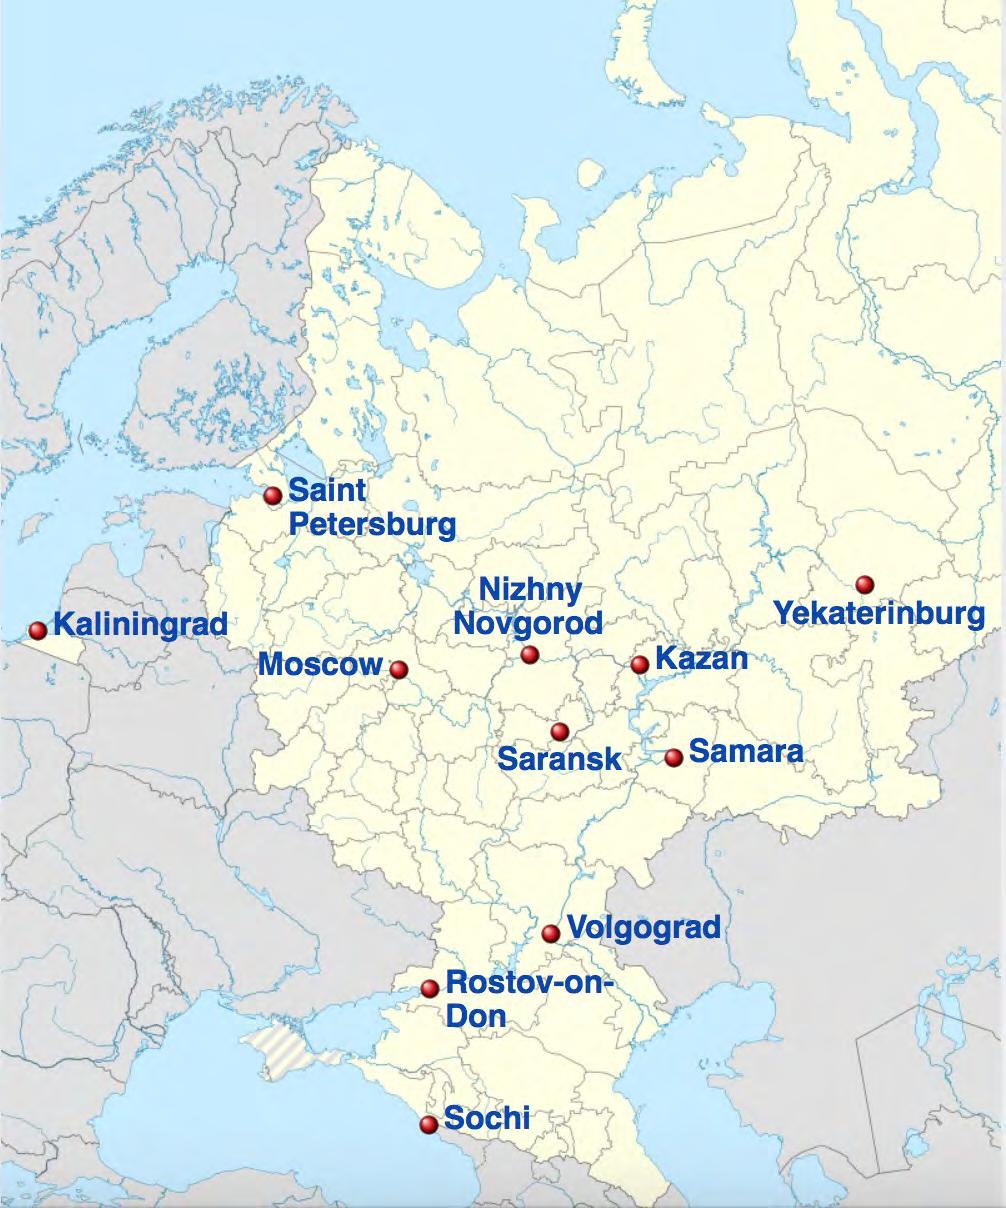 venues located in 11 played in 12 host